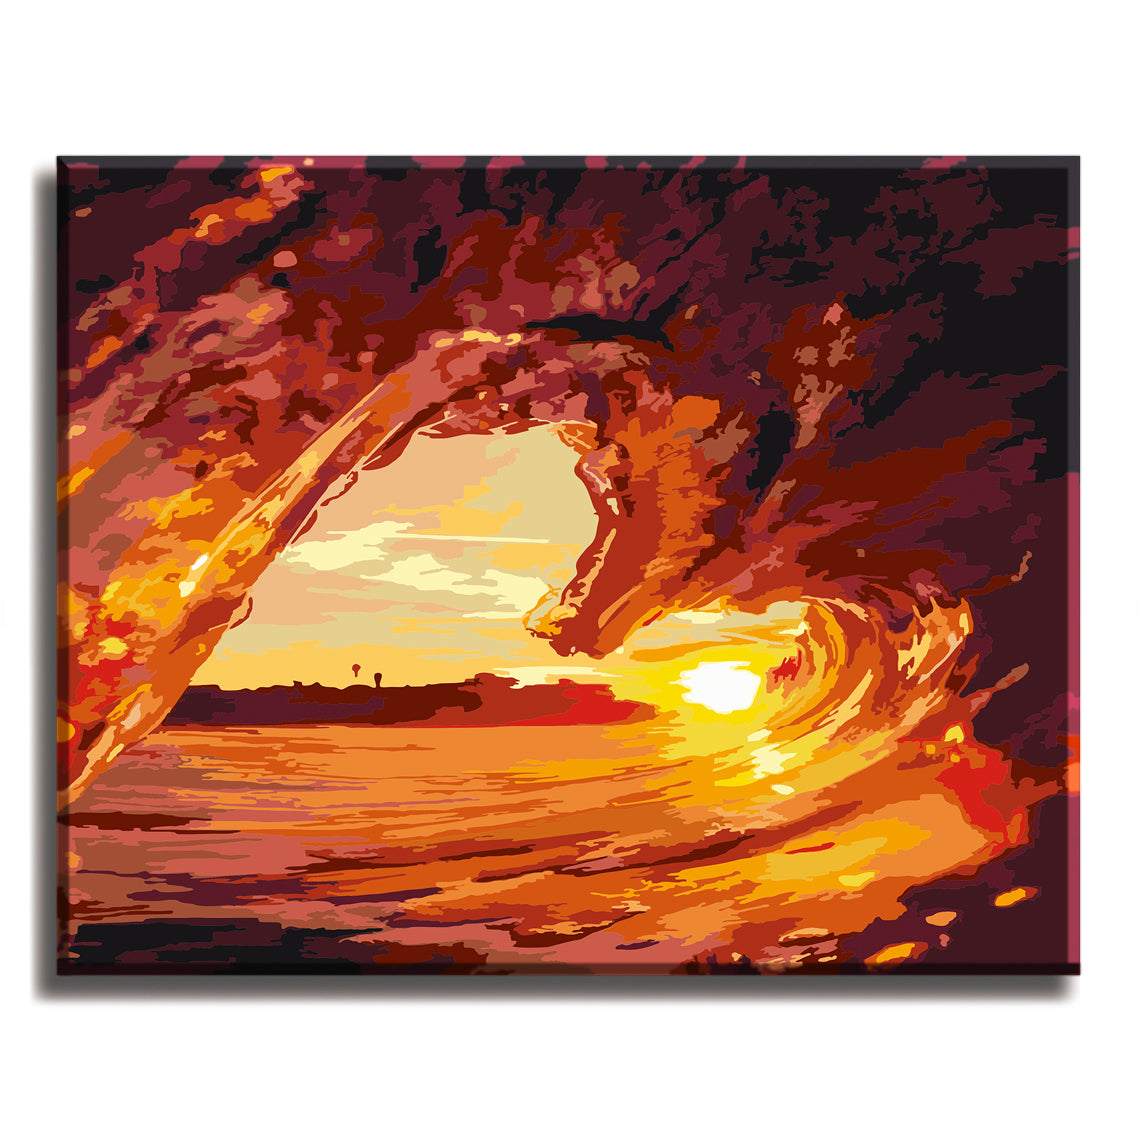 Under the Cave - Paint by Numbers Kit for Adults DIY Oil Painting